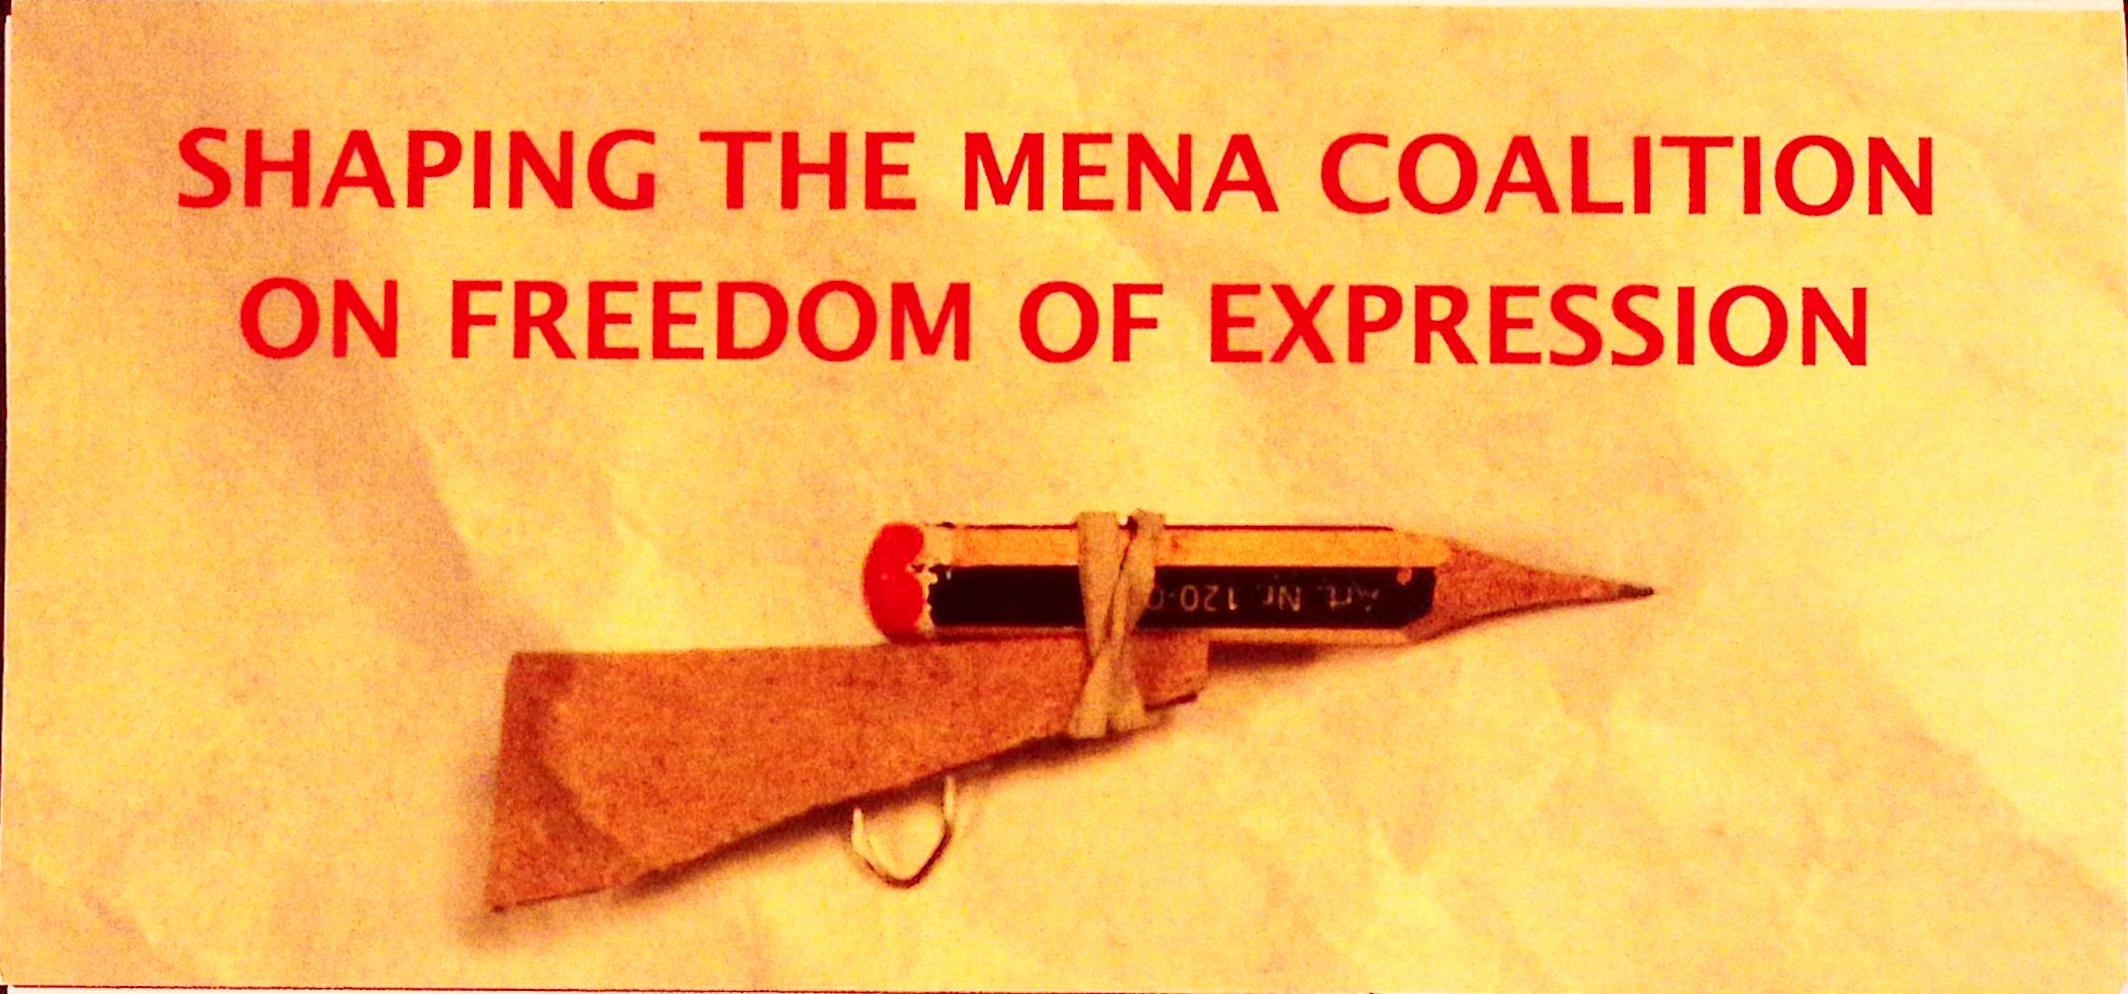 Gennaio 2013 – Shaping the mena coalition on freedom of expression